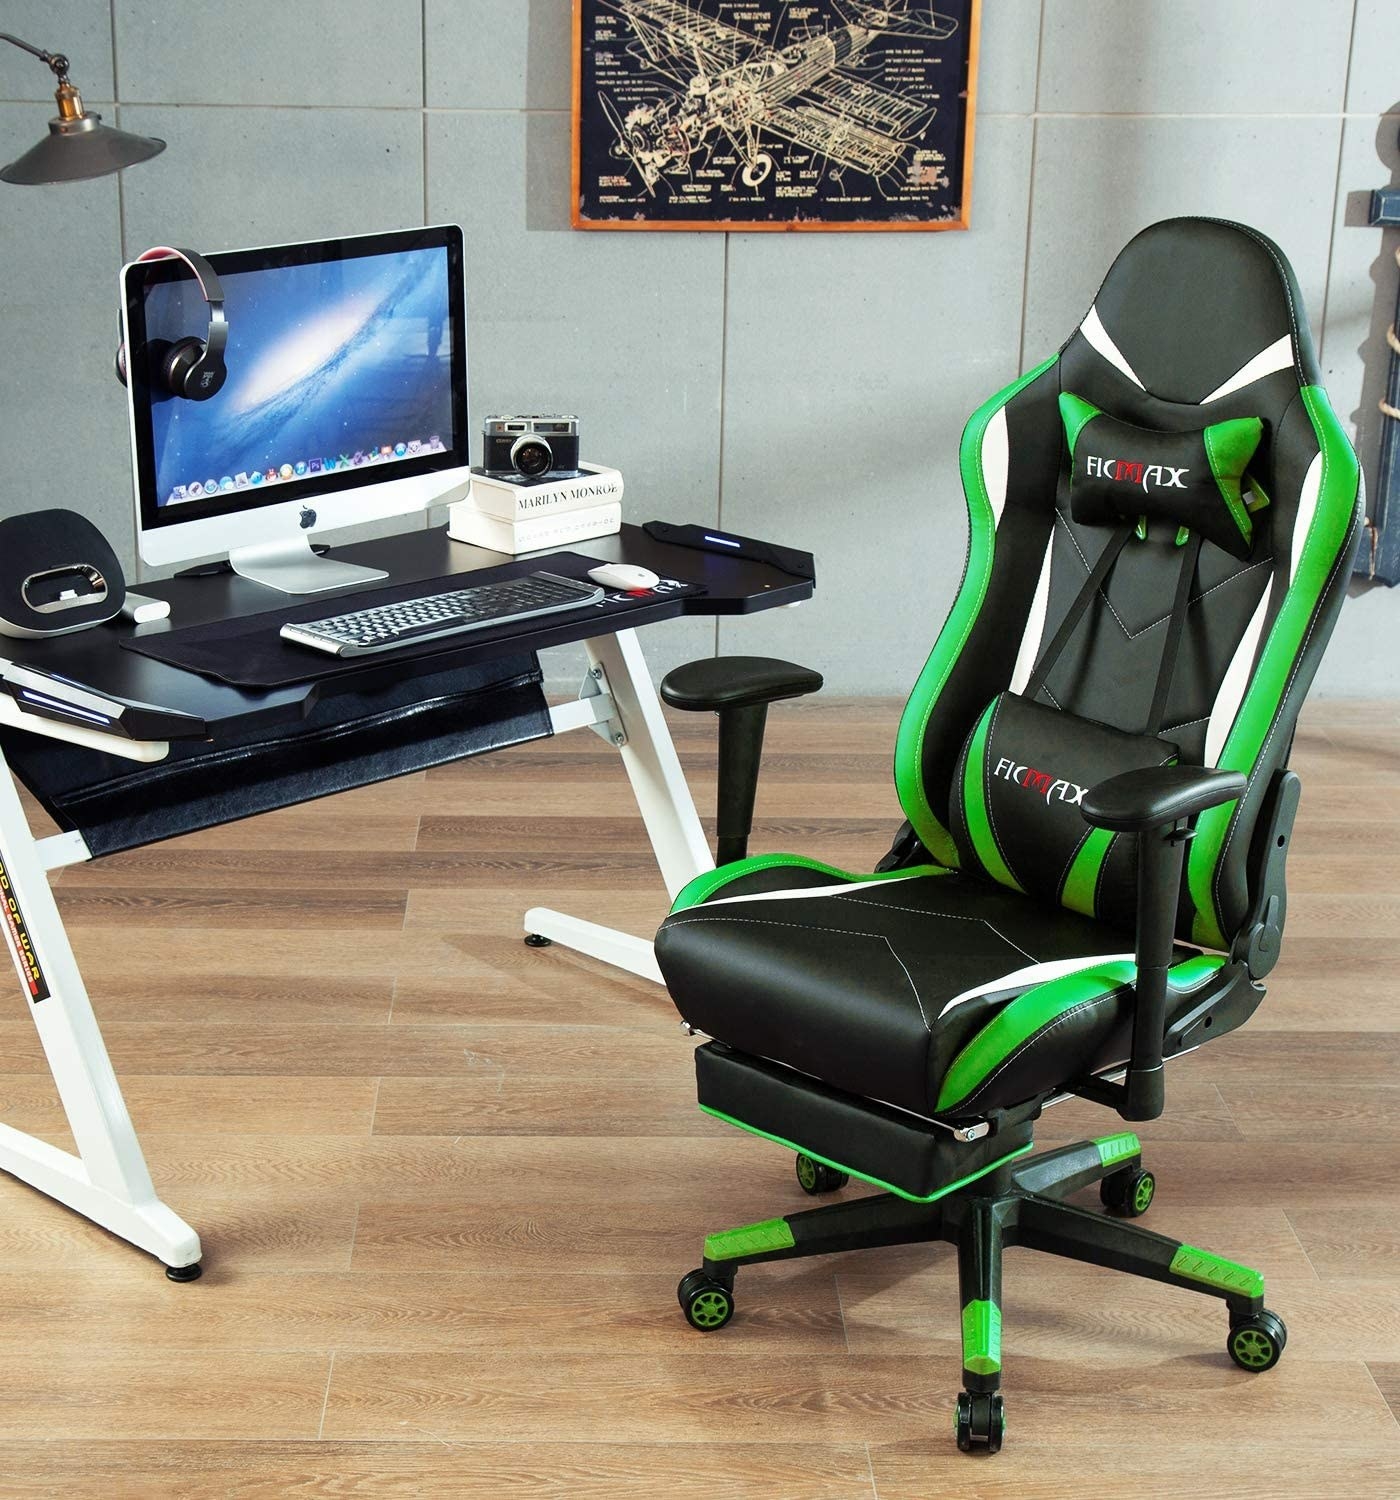 the supportive chair in a black and green design